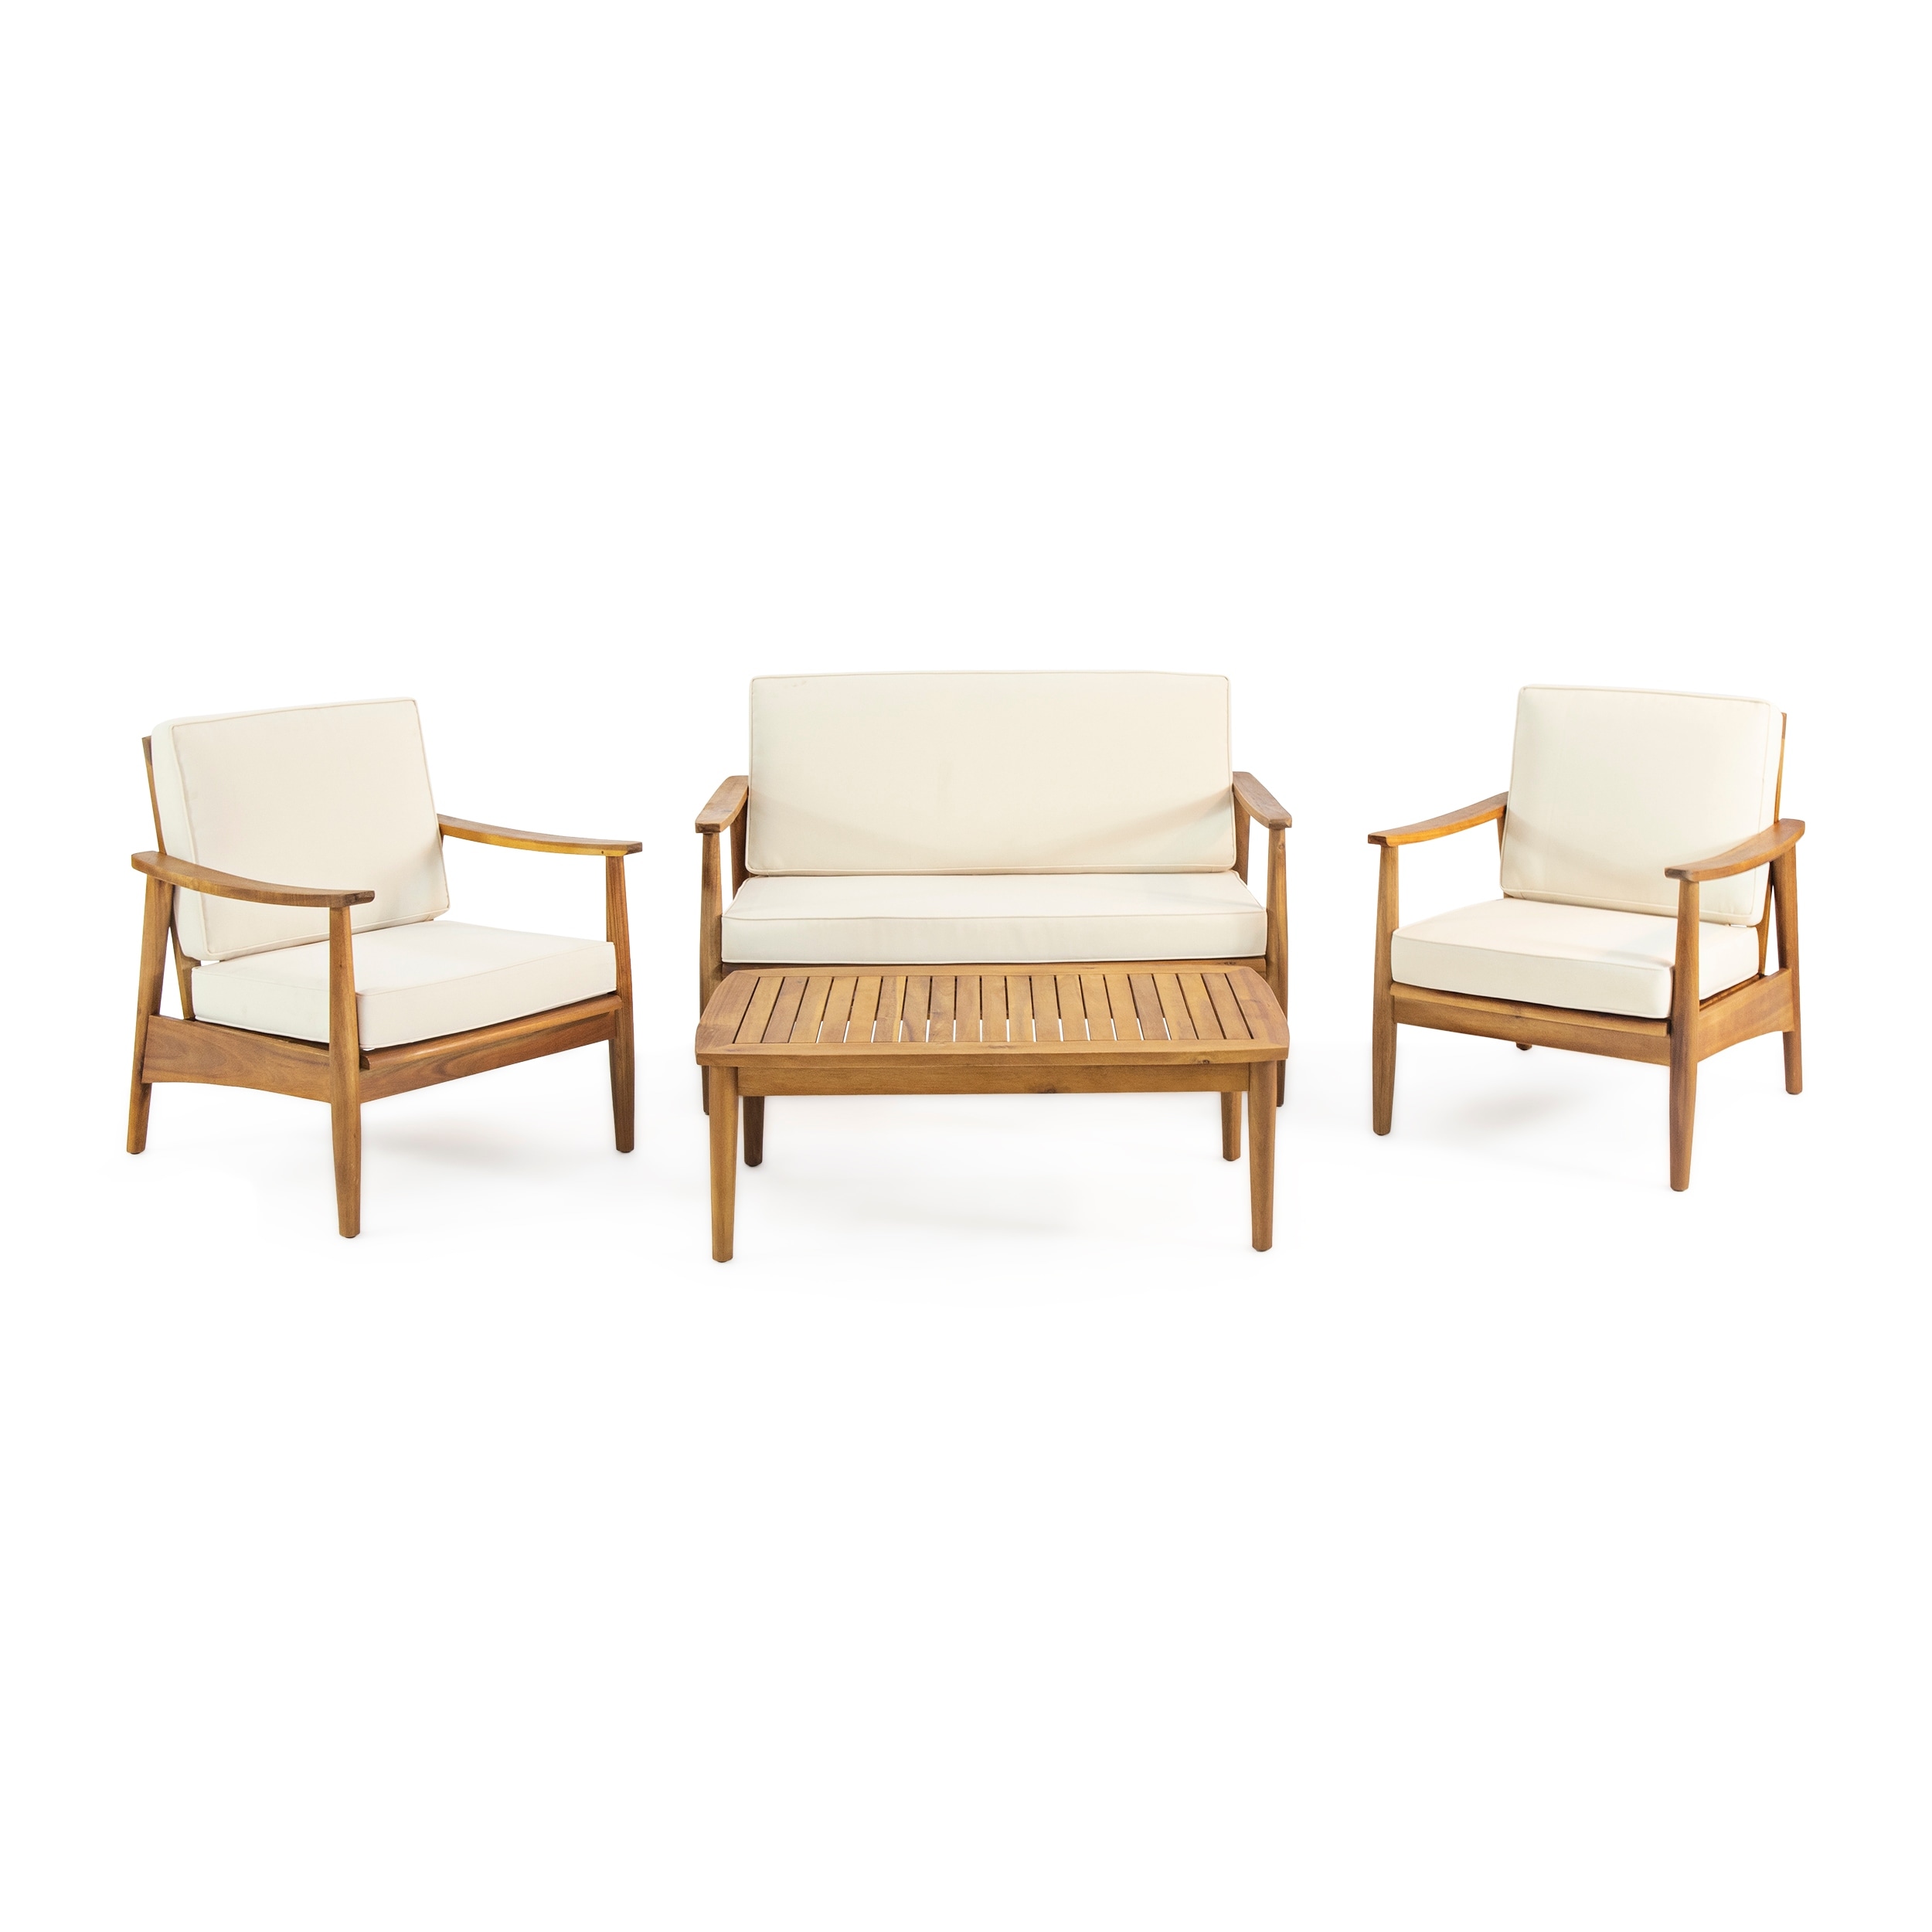 Willowbrook Outdoor Acacia Wood 4 Seater Chat Set By Christopher Knight Home